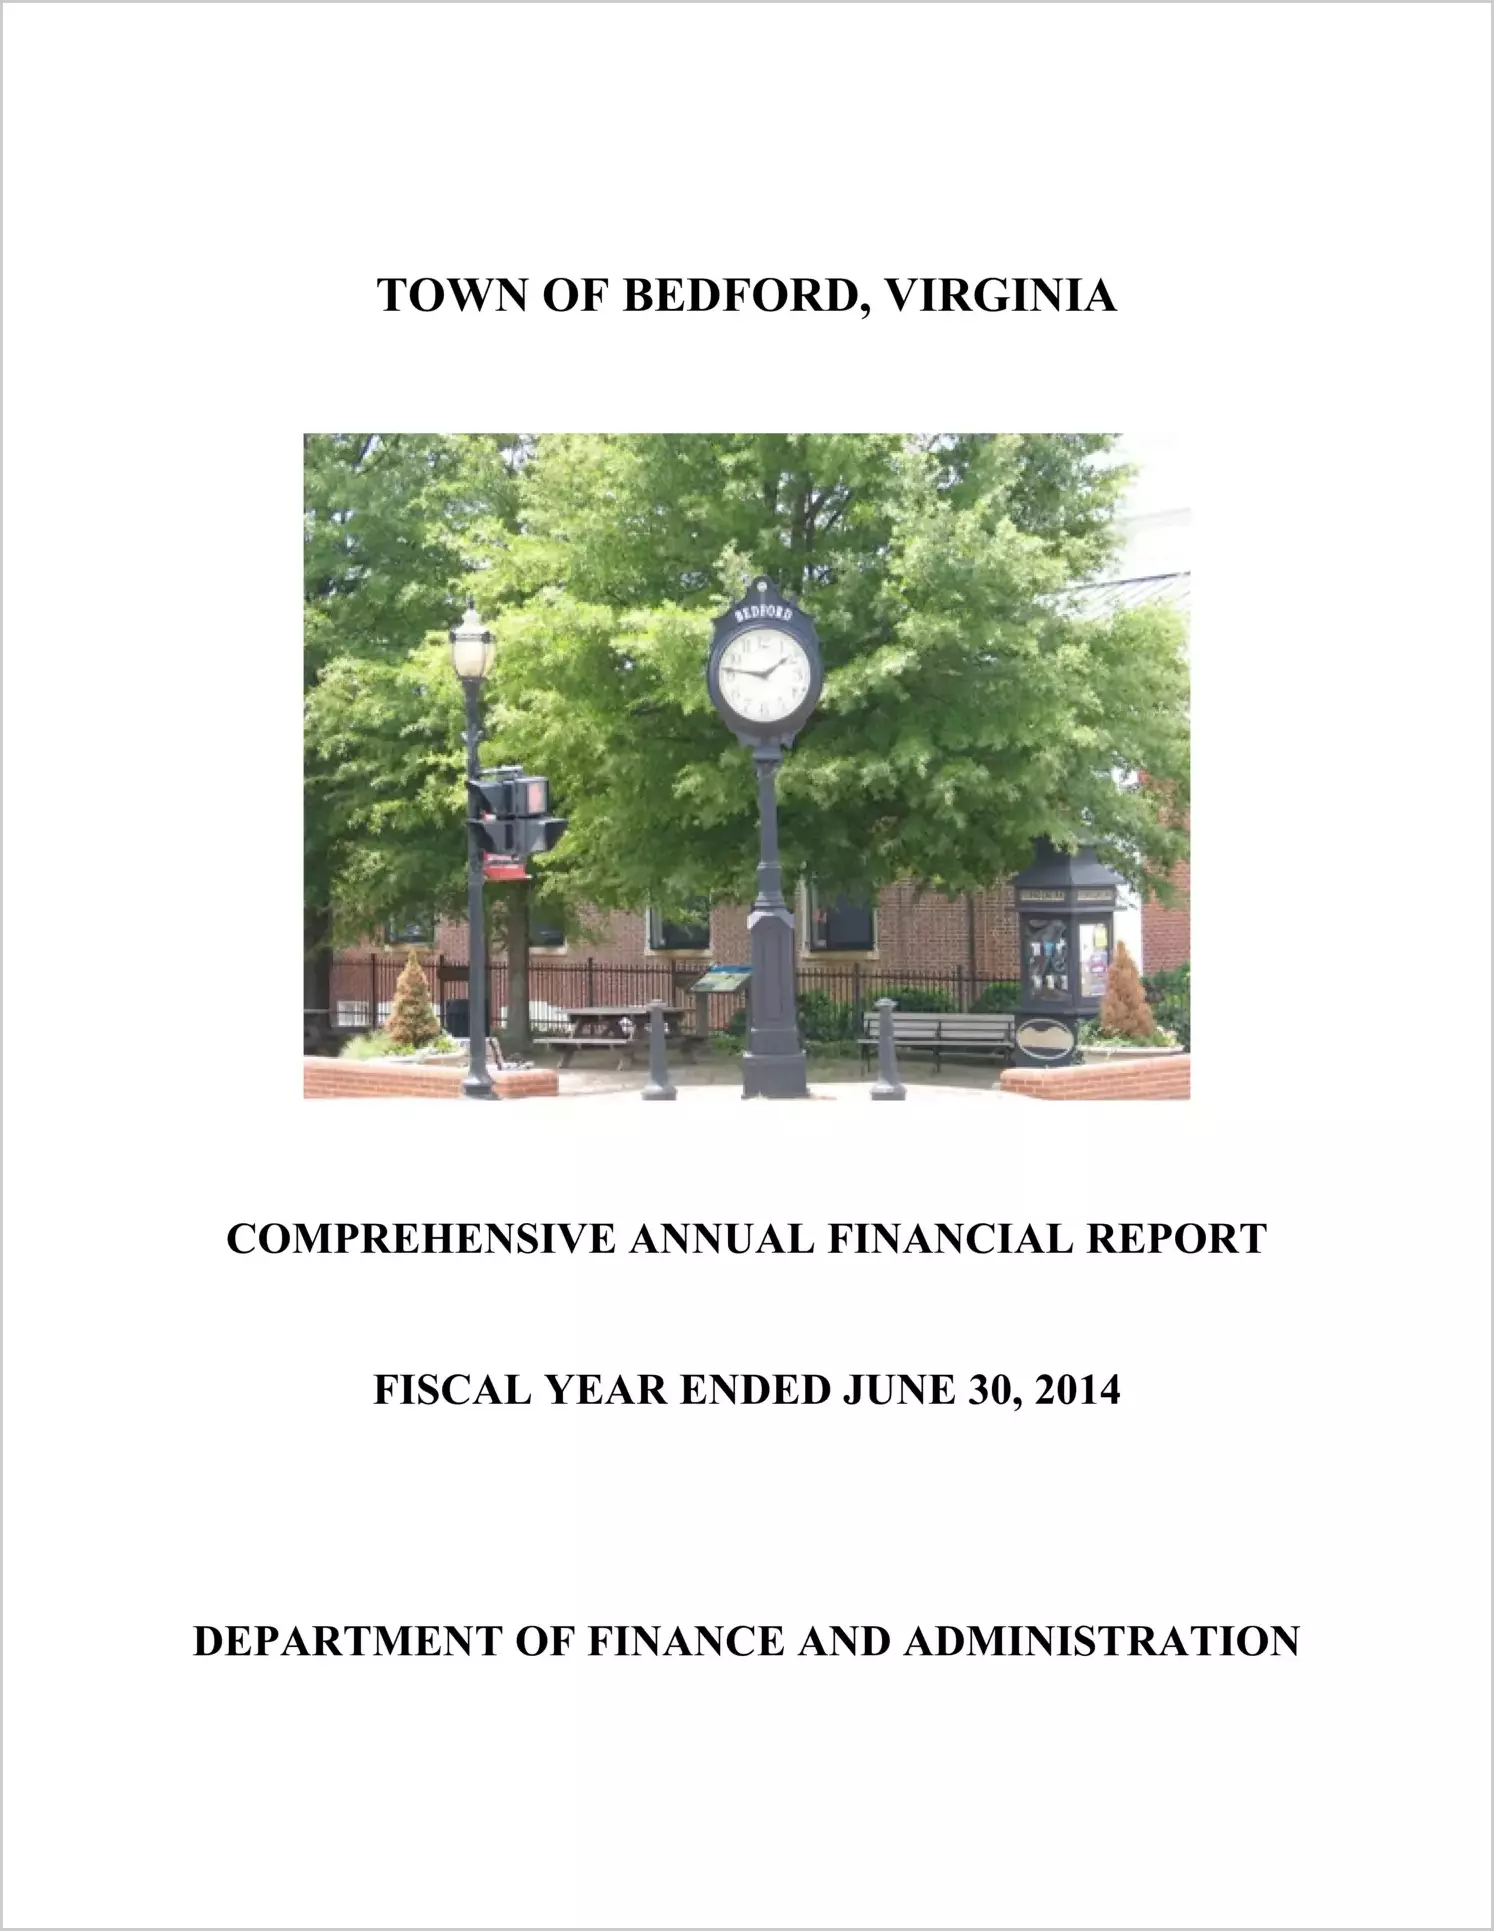 2014 Annual Financial Report for Town of Bedford